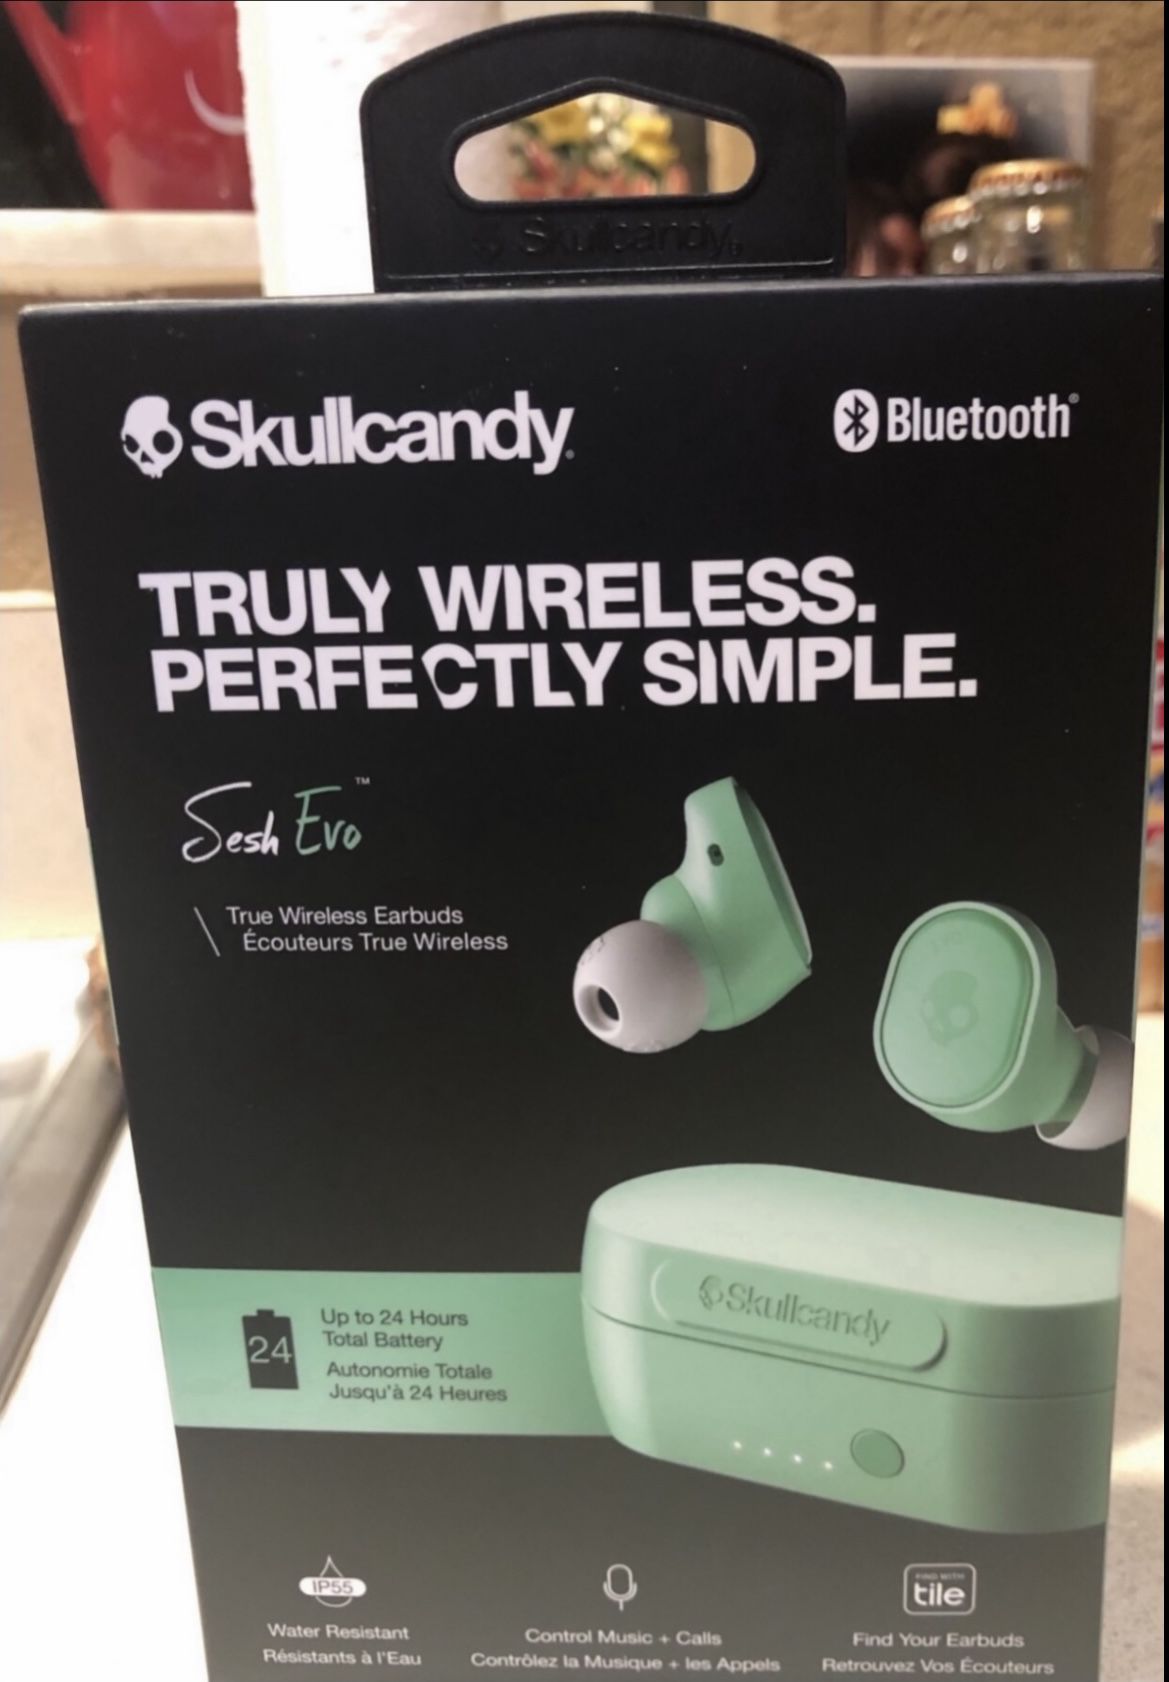 2 new Skullcandy wireless earbuds $40 each..last Picture Is Price Comp Only 